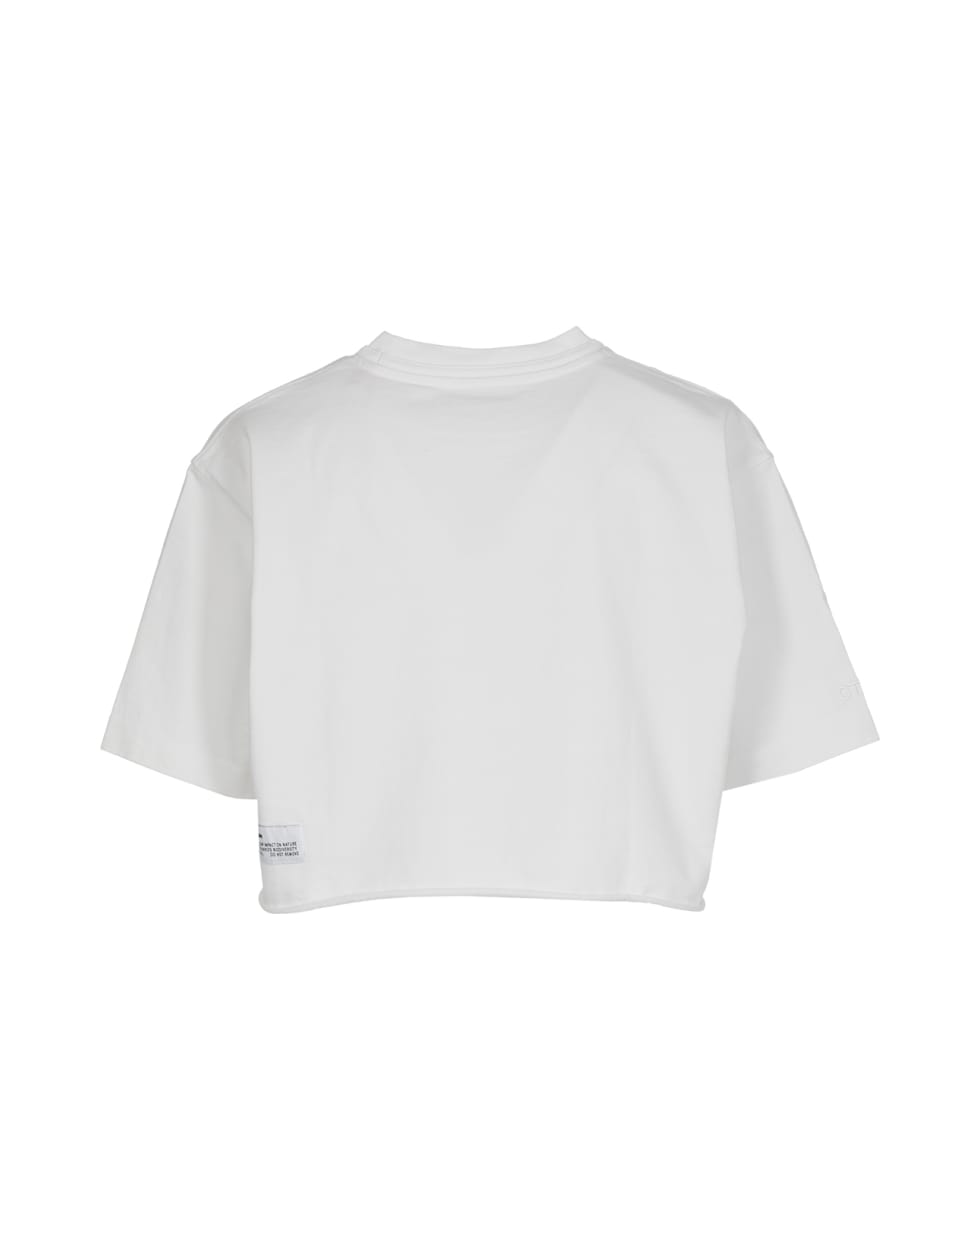 HERON PRESTON Cropped T-shirt With Lettering - WHITE RED